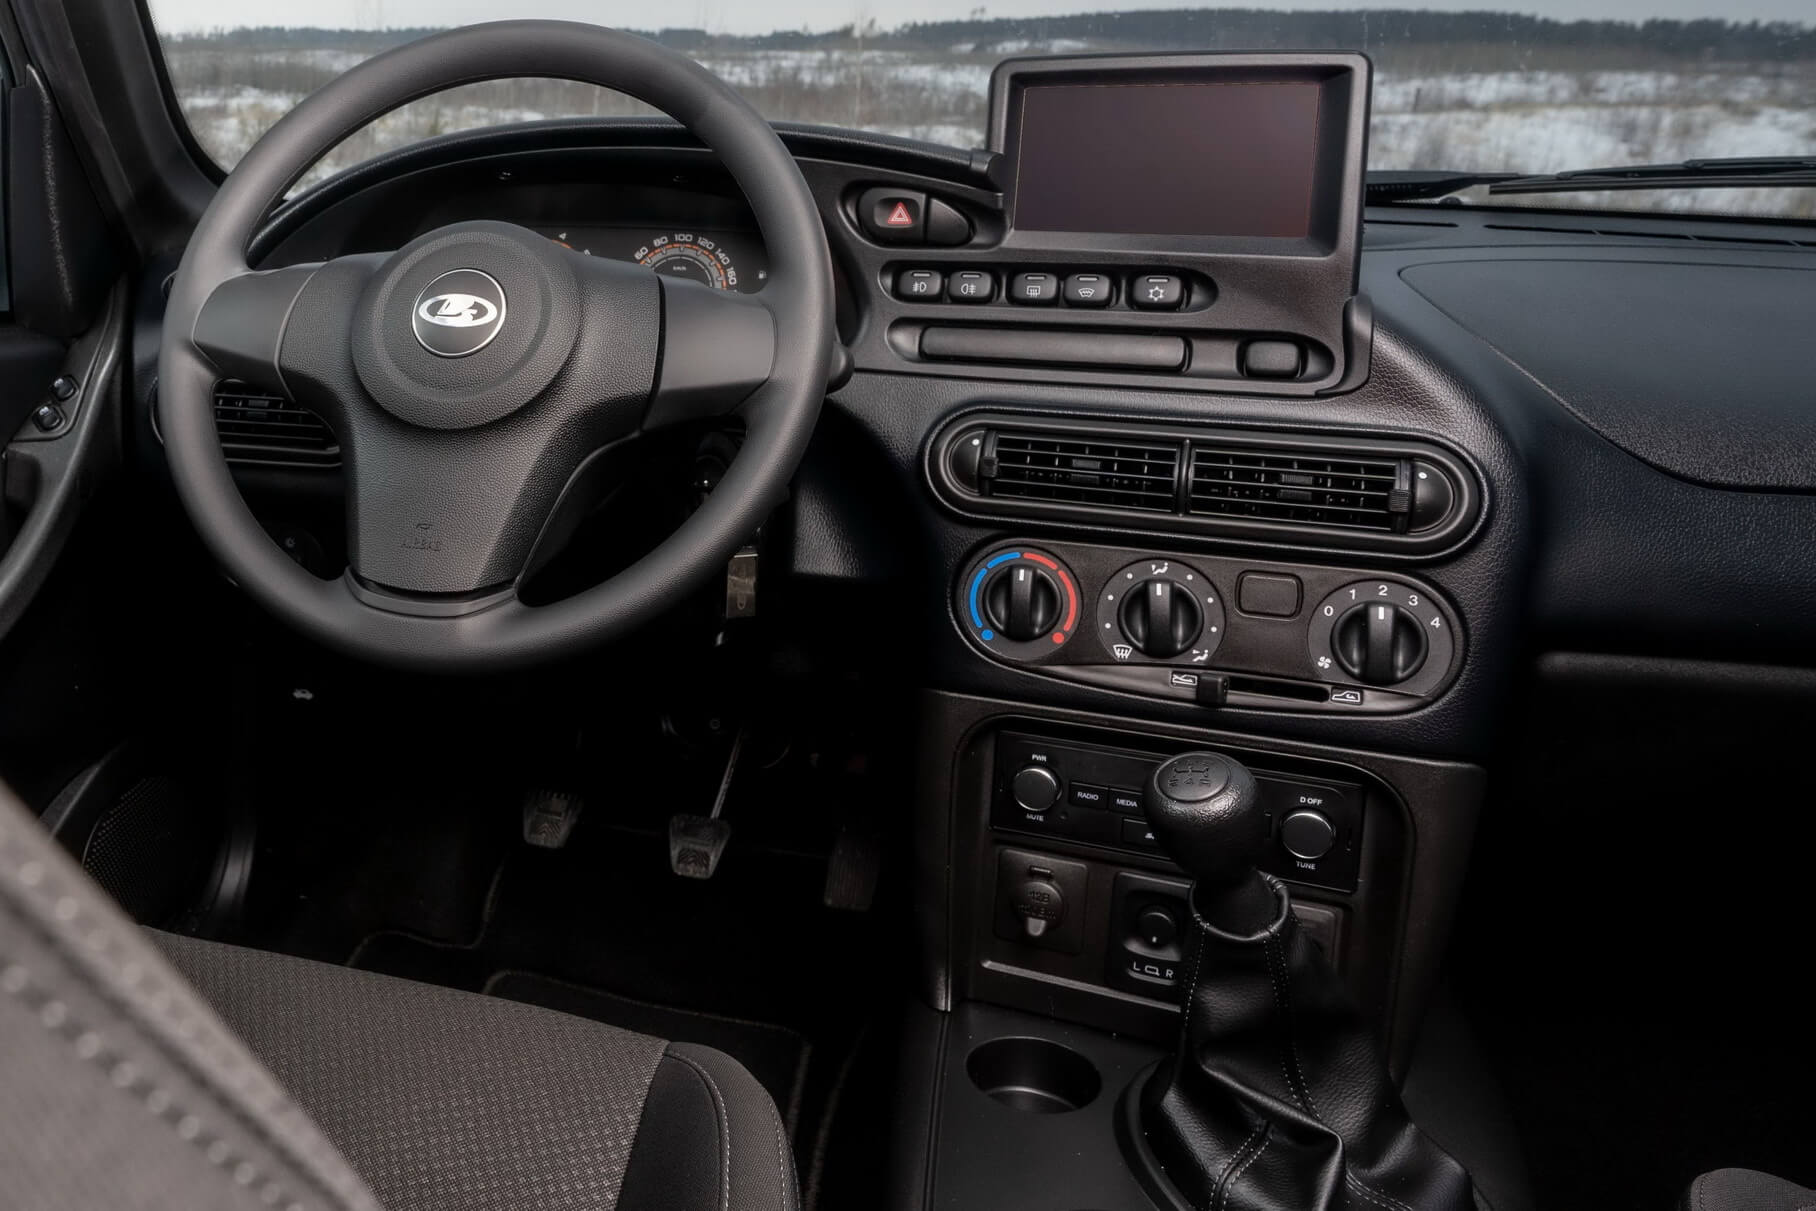 AvtoVAZ assembled the first Niva with an advanced media system